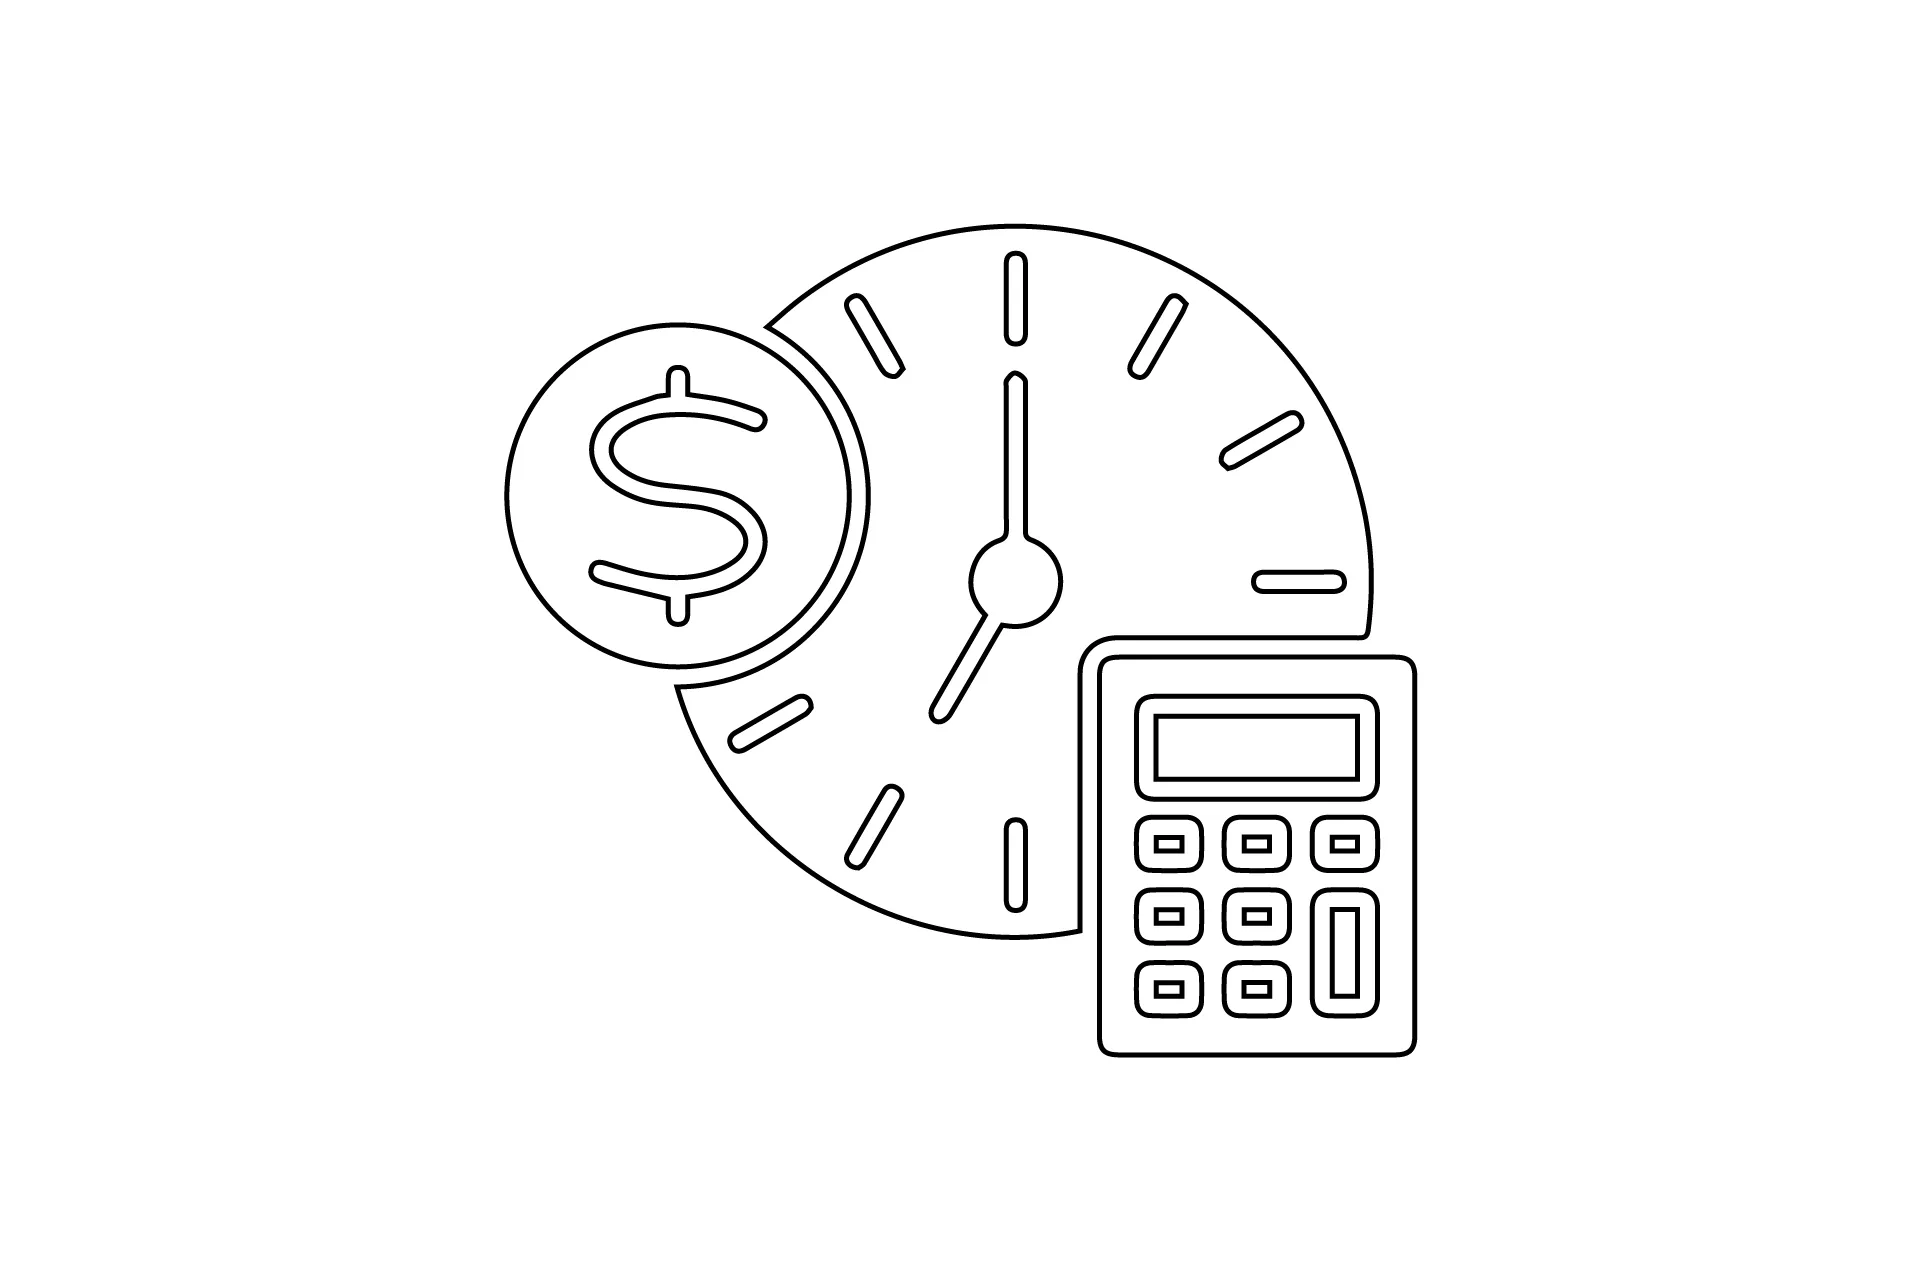 An icon that visualizes time, money and a calculator in a shared space.